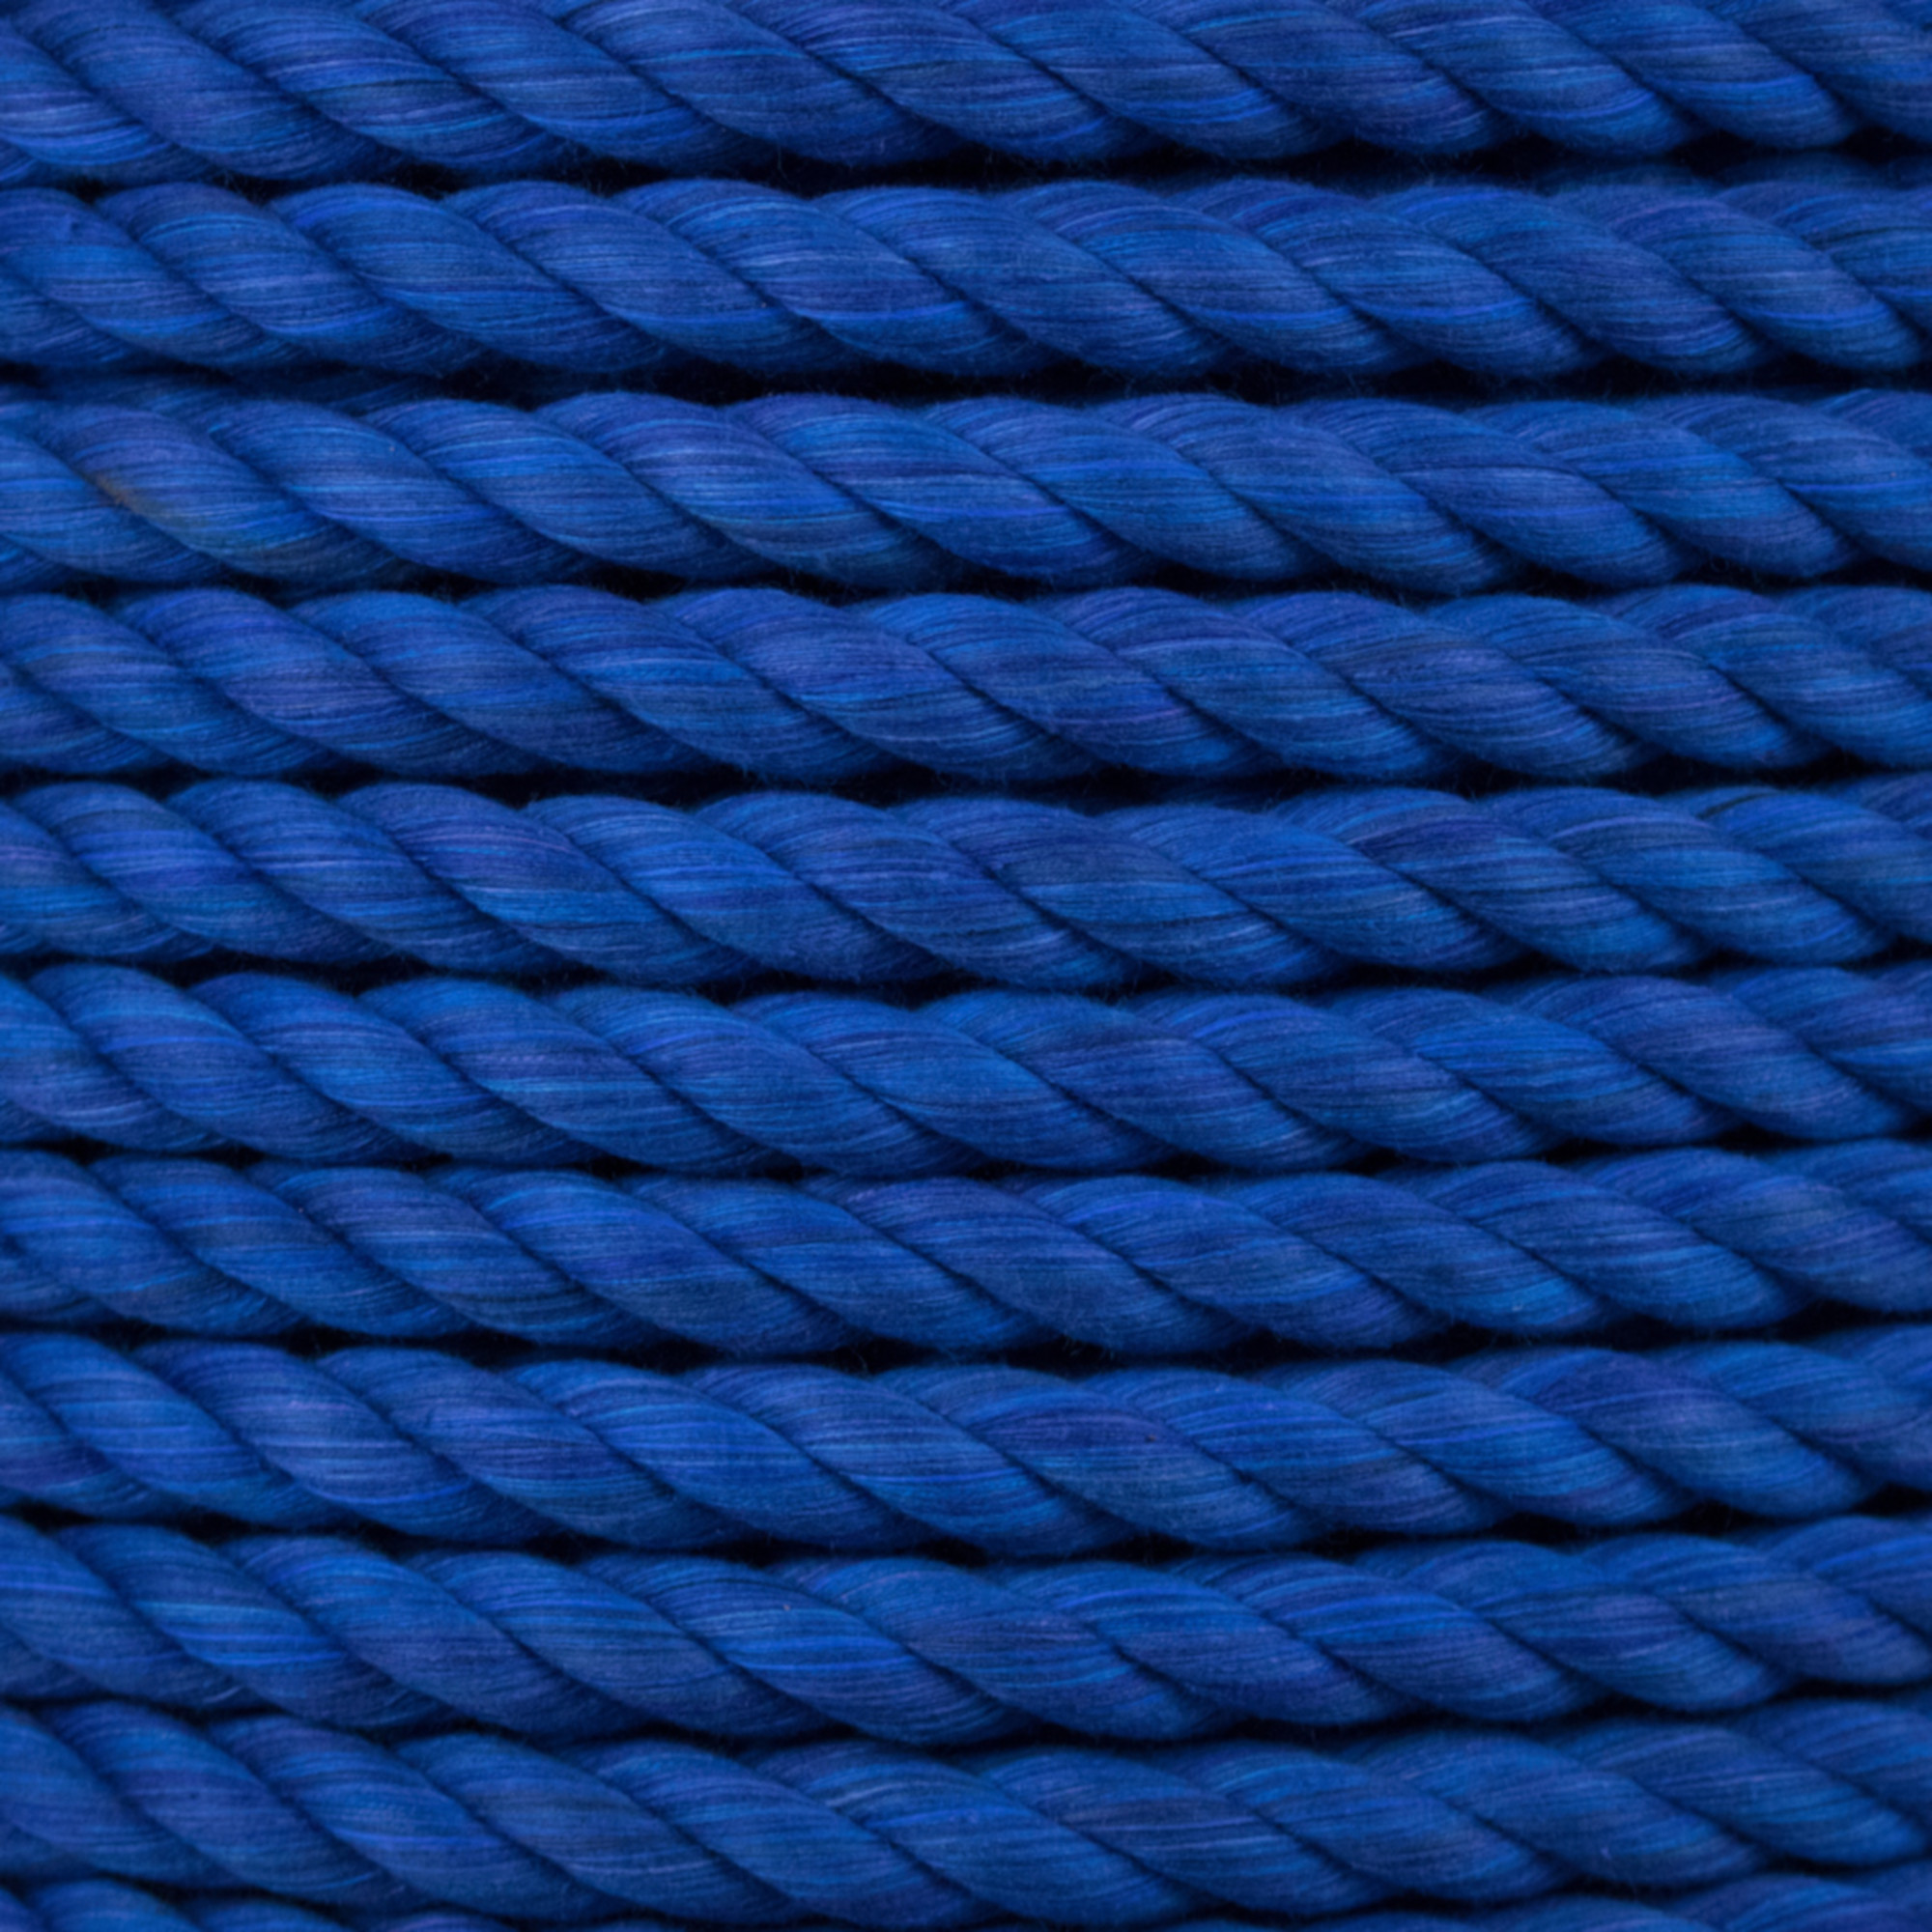 West Coast Paracord Natural Cotton Rope 1/2 Inch Twisted Soft Rope by the Foot in 25 Feet, 50 Feet, 100 Feet, and 600 Feet. Pet Safe and USA Made - image 1 of 4